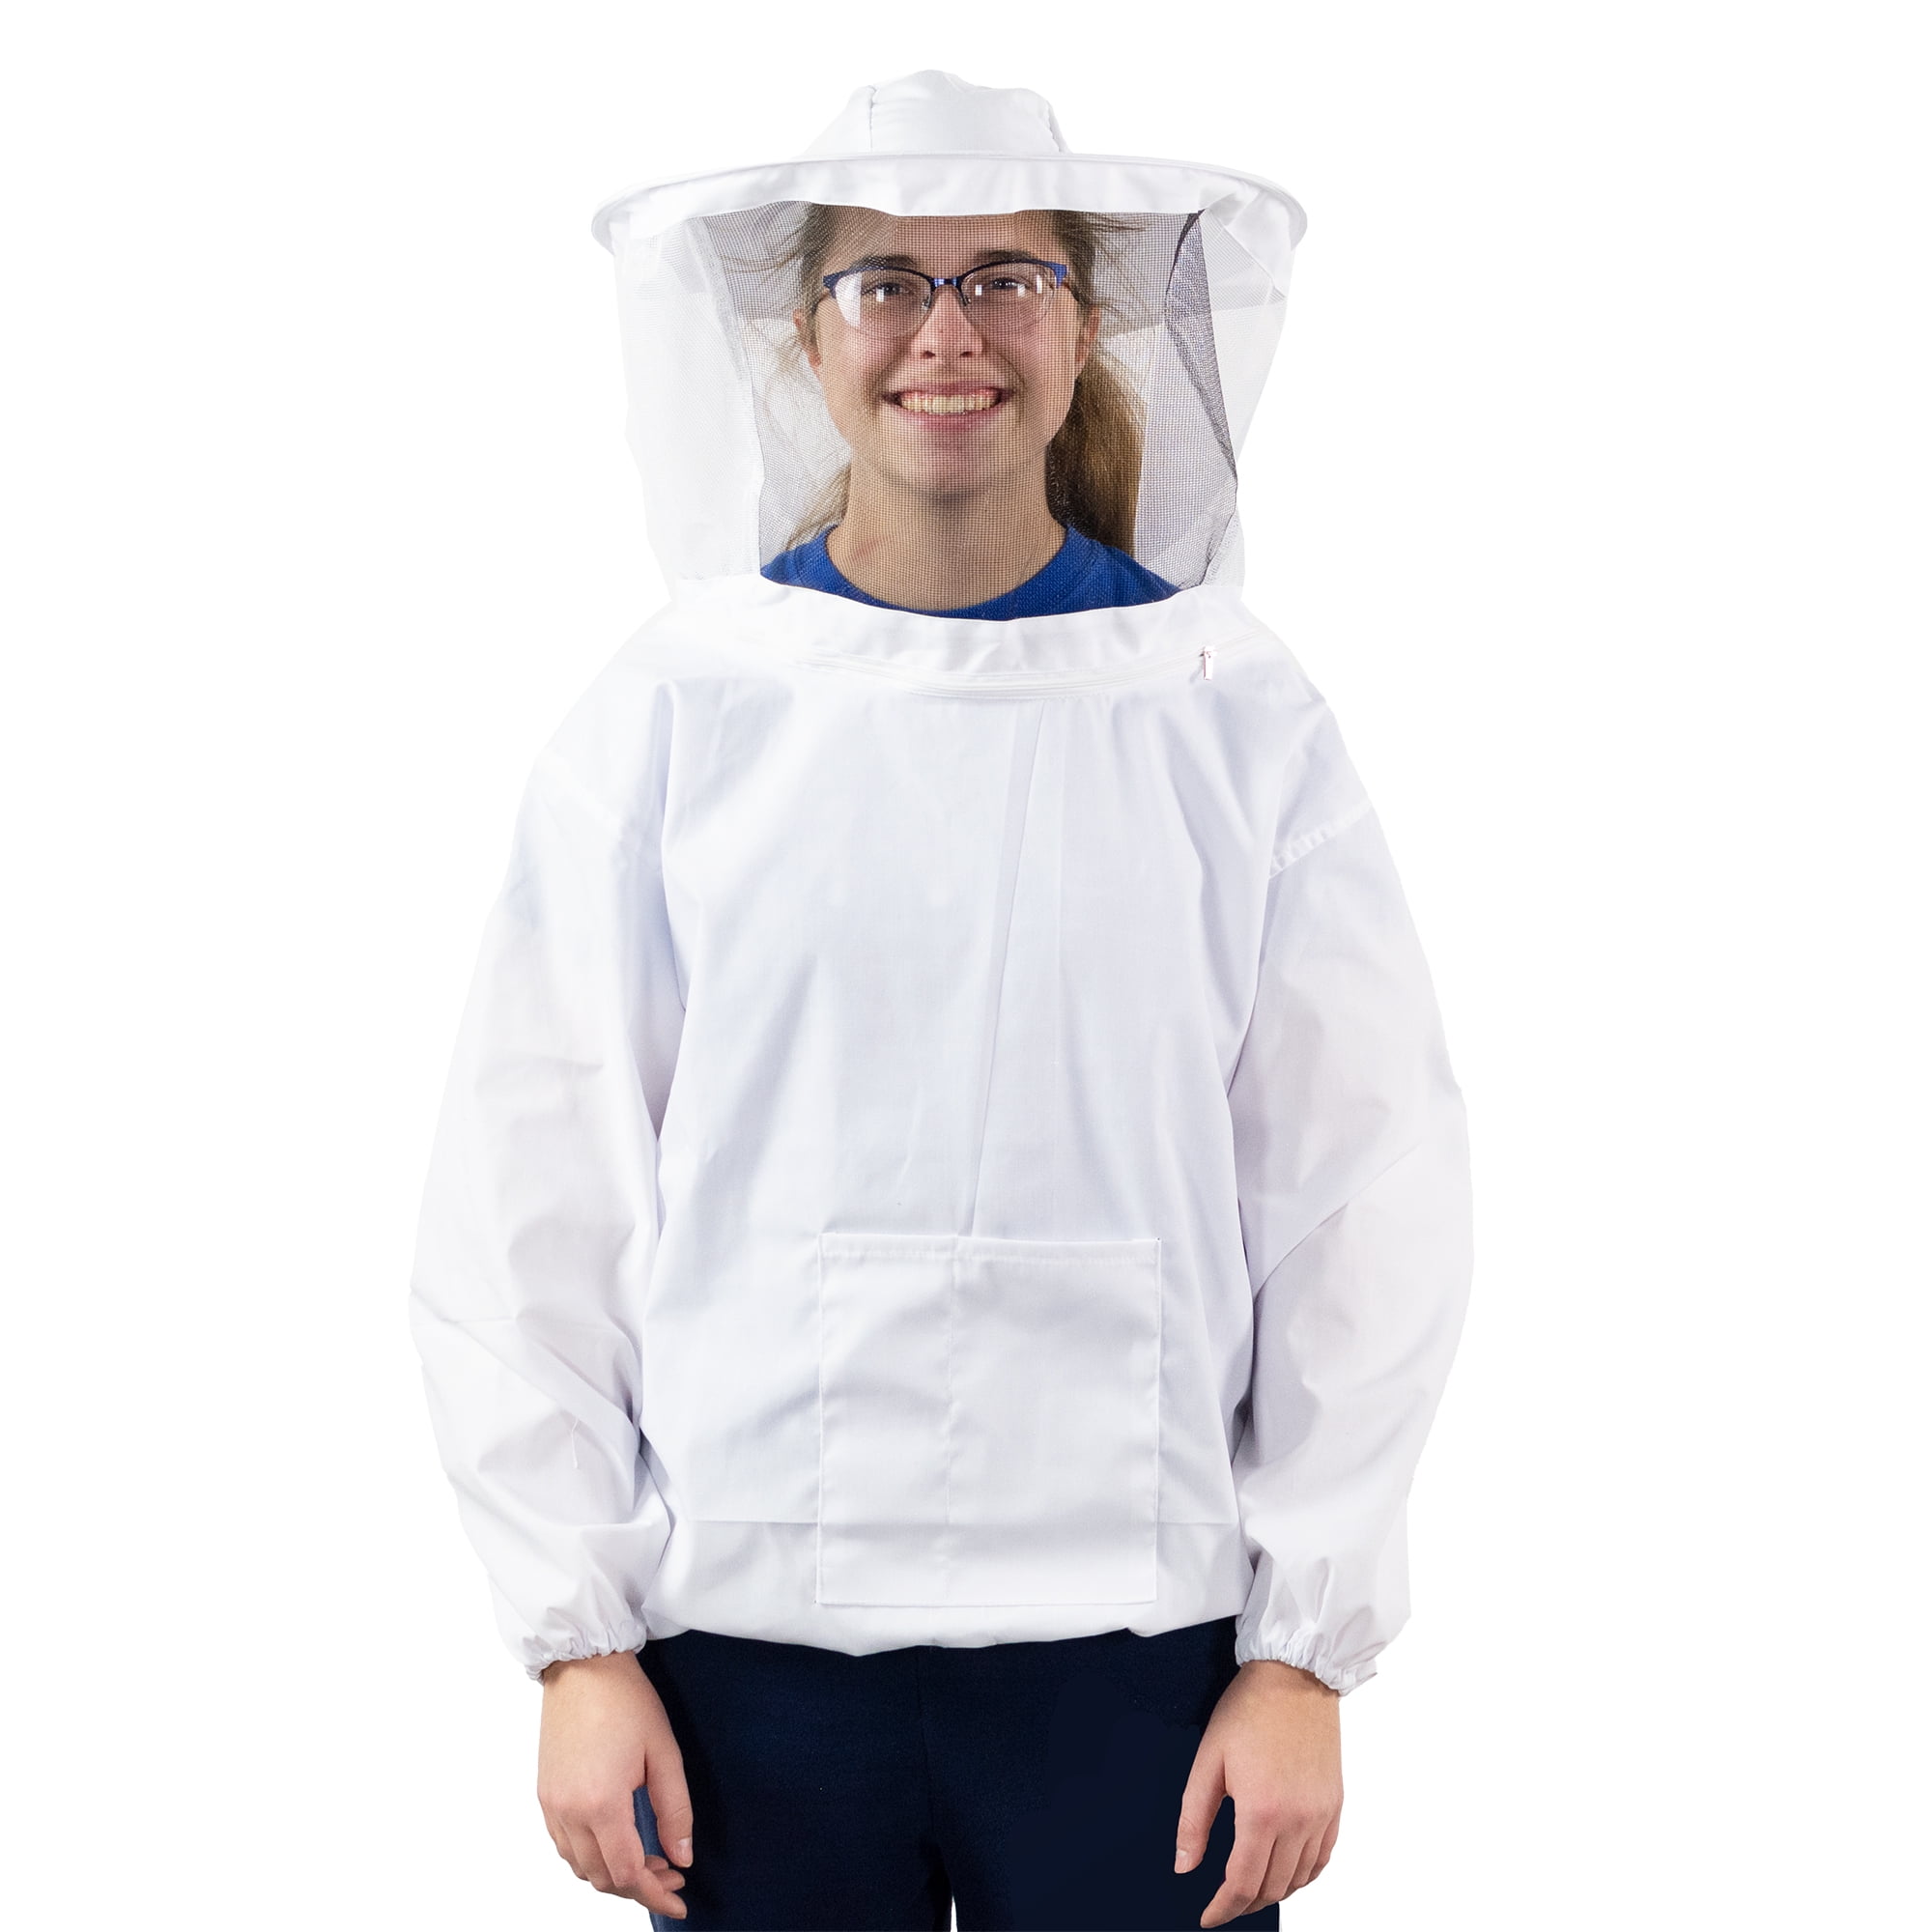 Professional Beekeeping Protective Suit Smock with Veil, Pull Over Jacket 